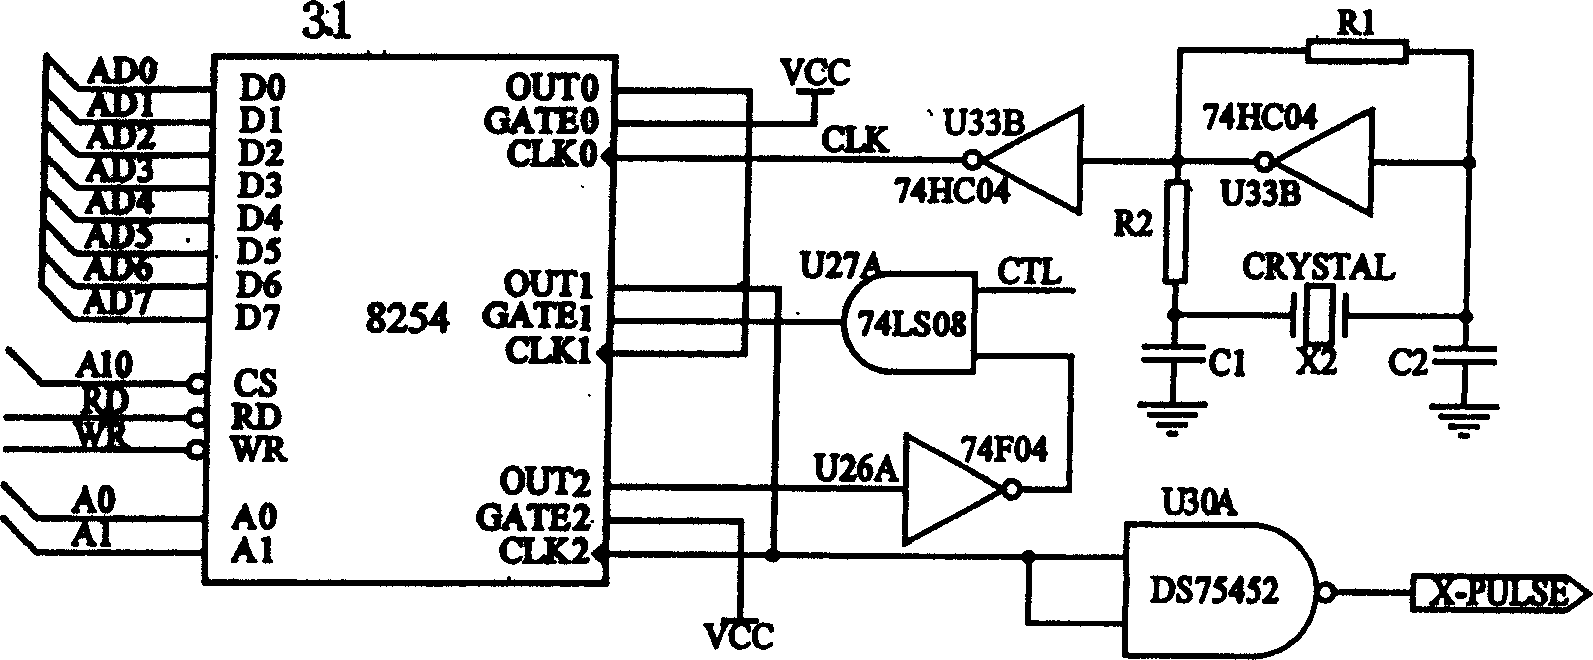 Multishaft motion control card based on RS-232 serial bus